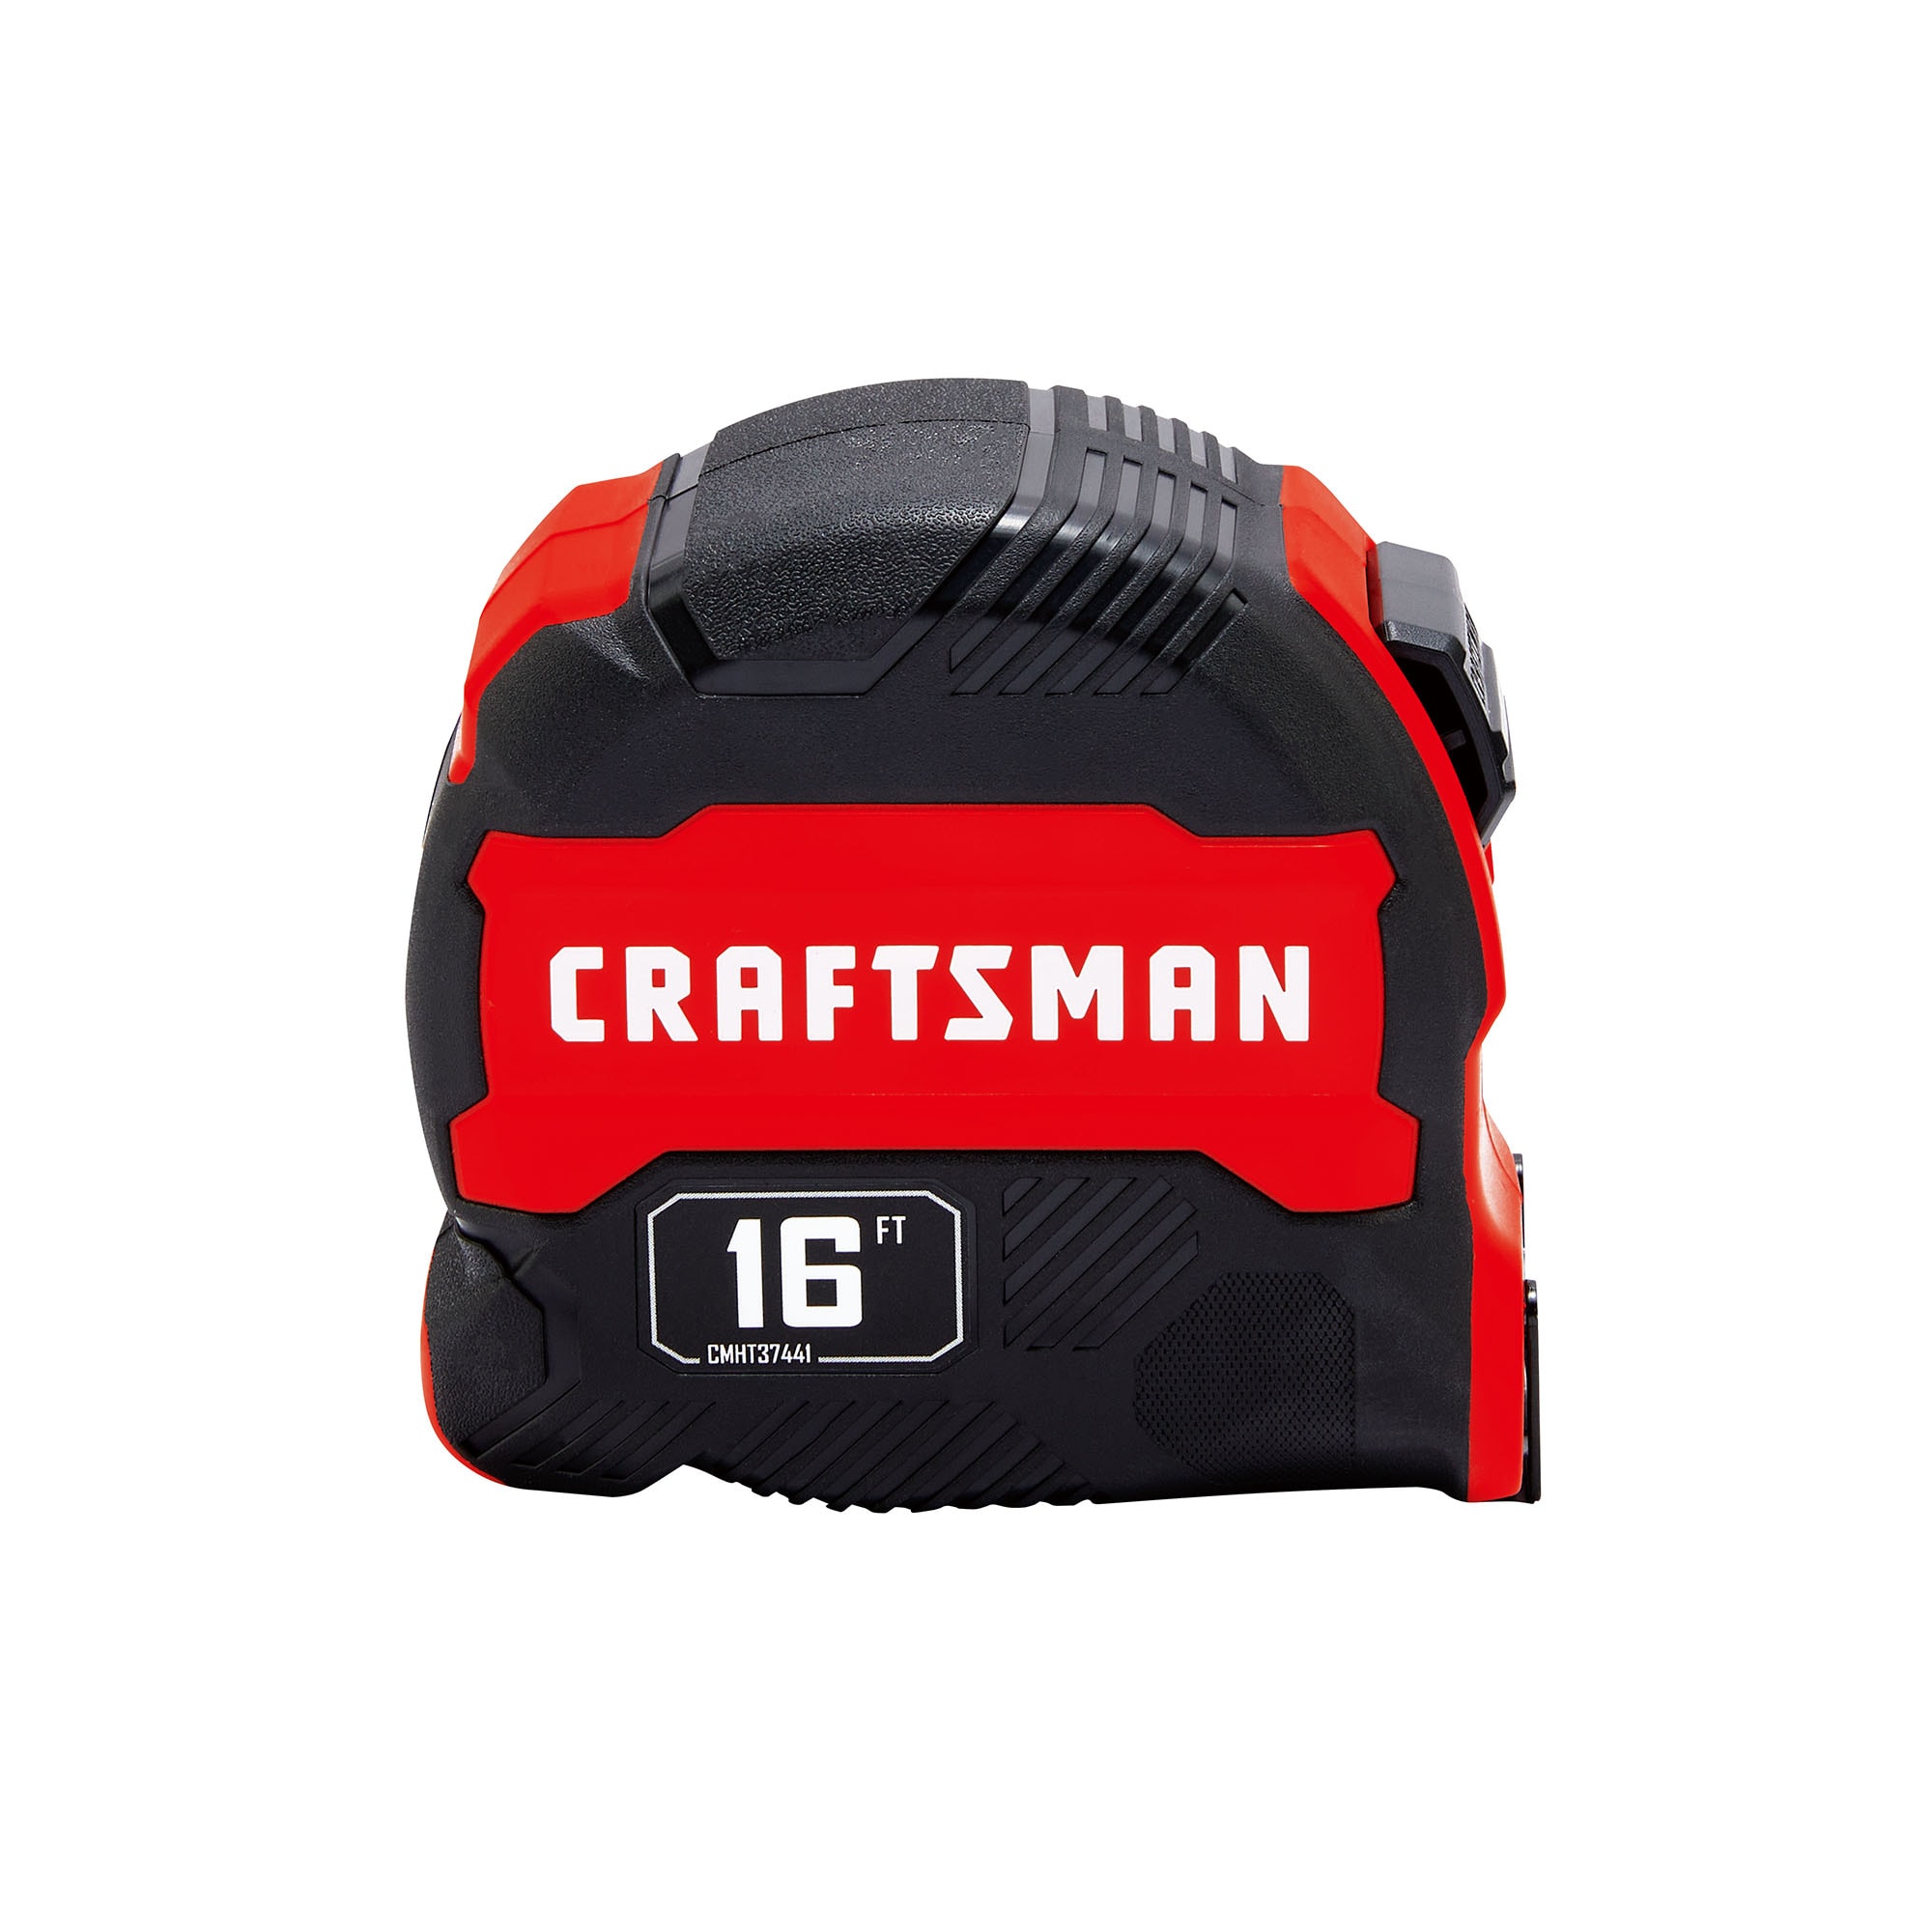 CRAFTSMAN 16-ft Auto Lock Tape Measure in the Tape Measures